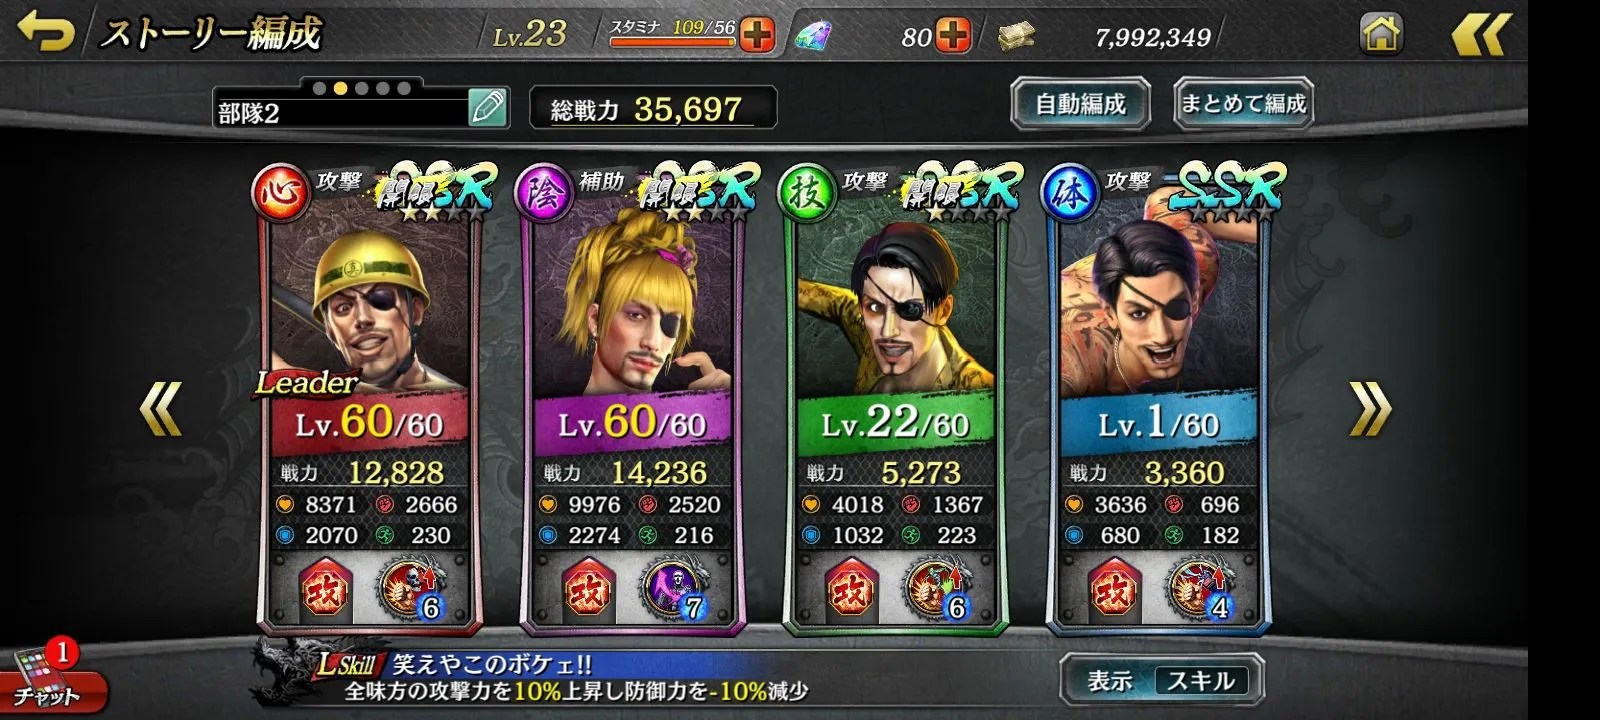 Yakuza Online x Tokyo Revengers Season 2 Collab Available from April 14 -  QooApp News